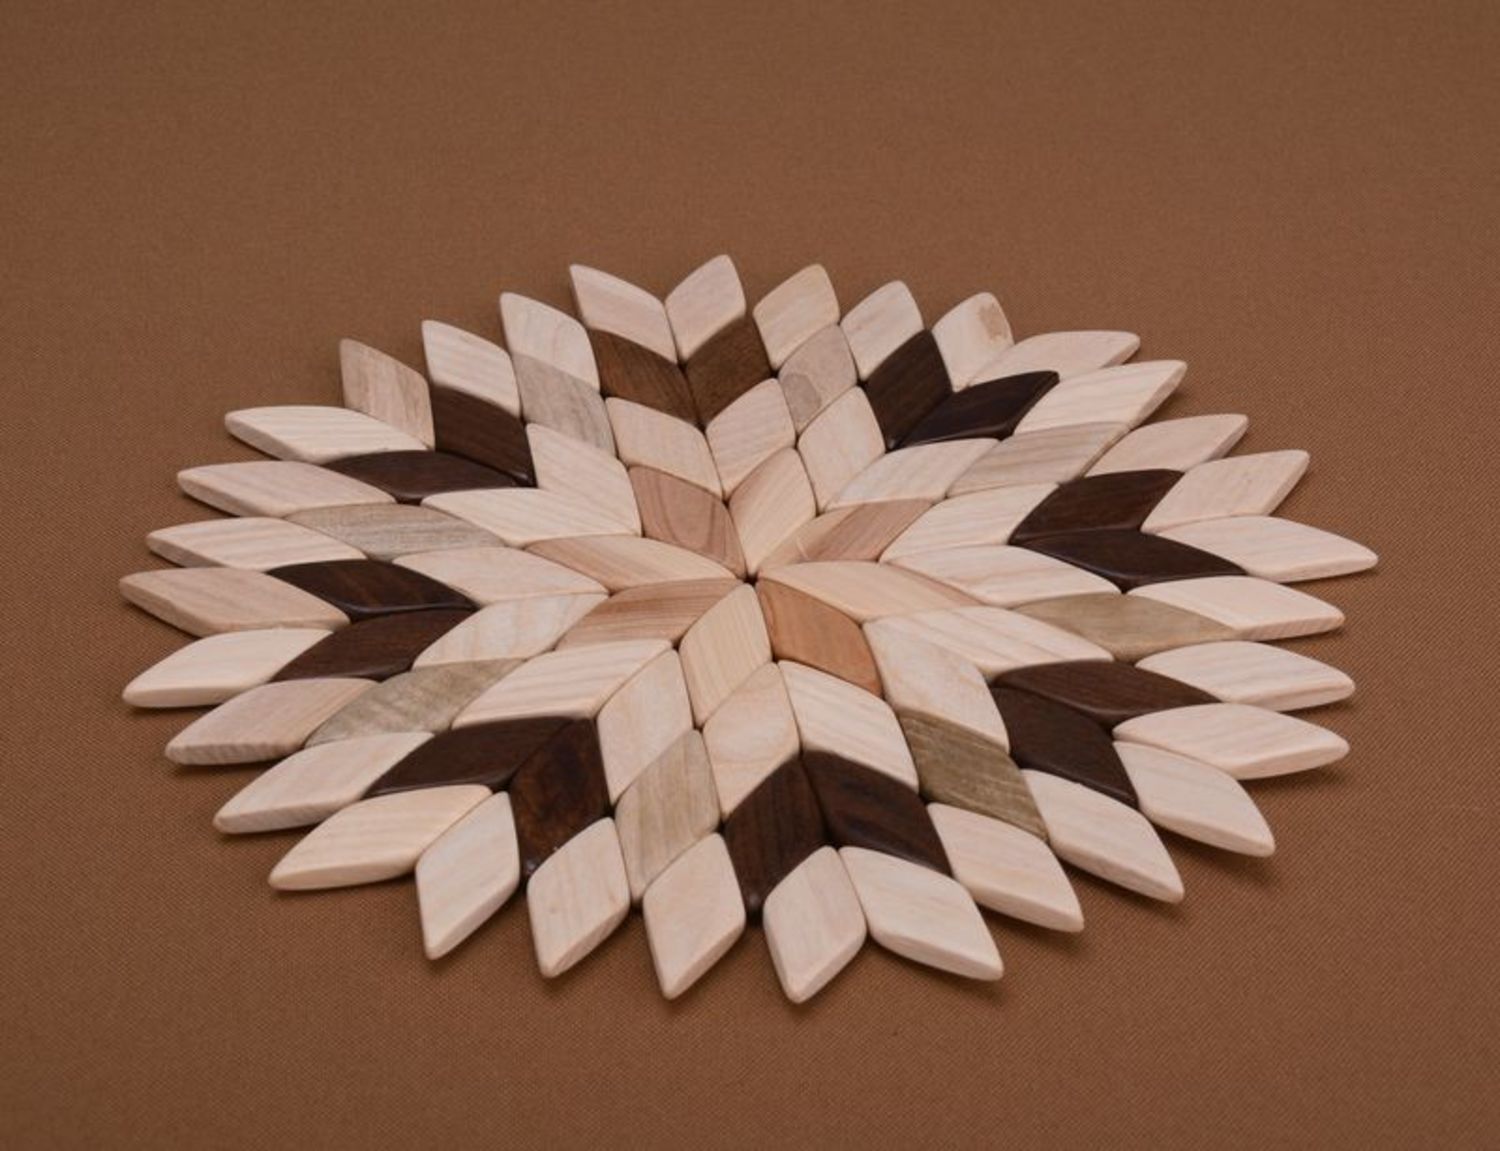 Coaster for hot dishes in the shape of a snowflake photo 1